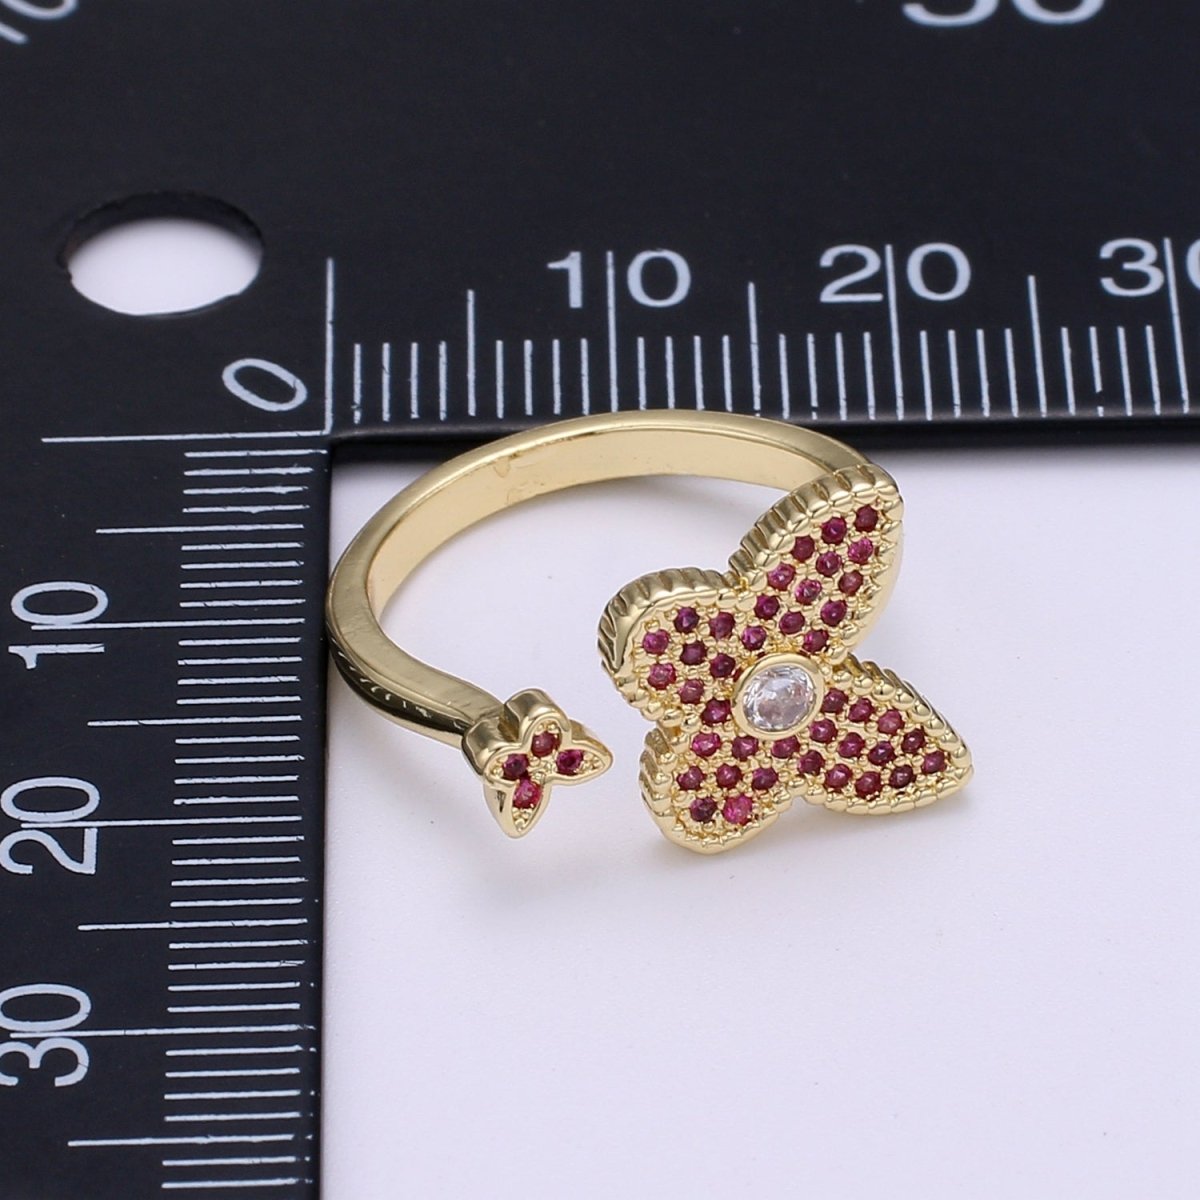 1x Dainty Butterfly Ring, Adjustable Gold Ring, Cz Mariposa Ring, Animal Lover Ring for Minimalist jewelry Everyday Wear O-273 ~ O-276 - DLUXCA